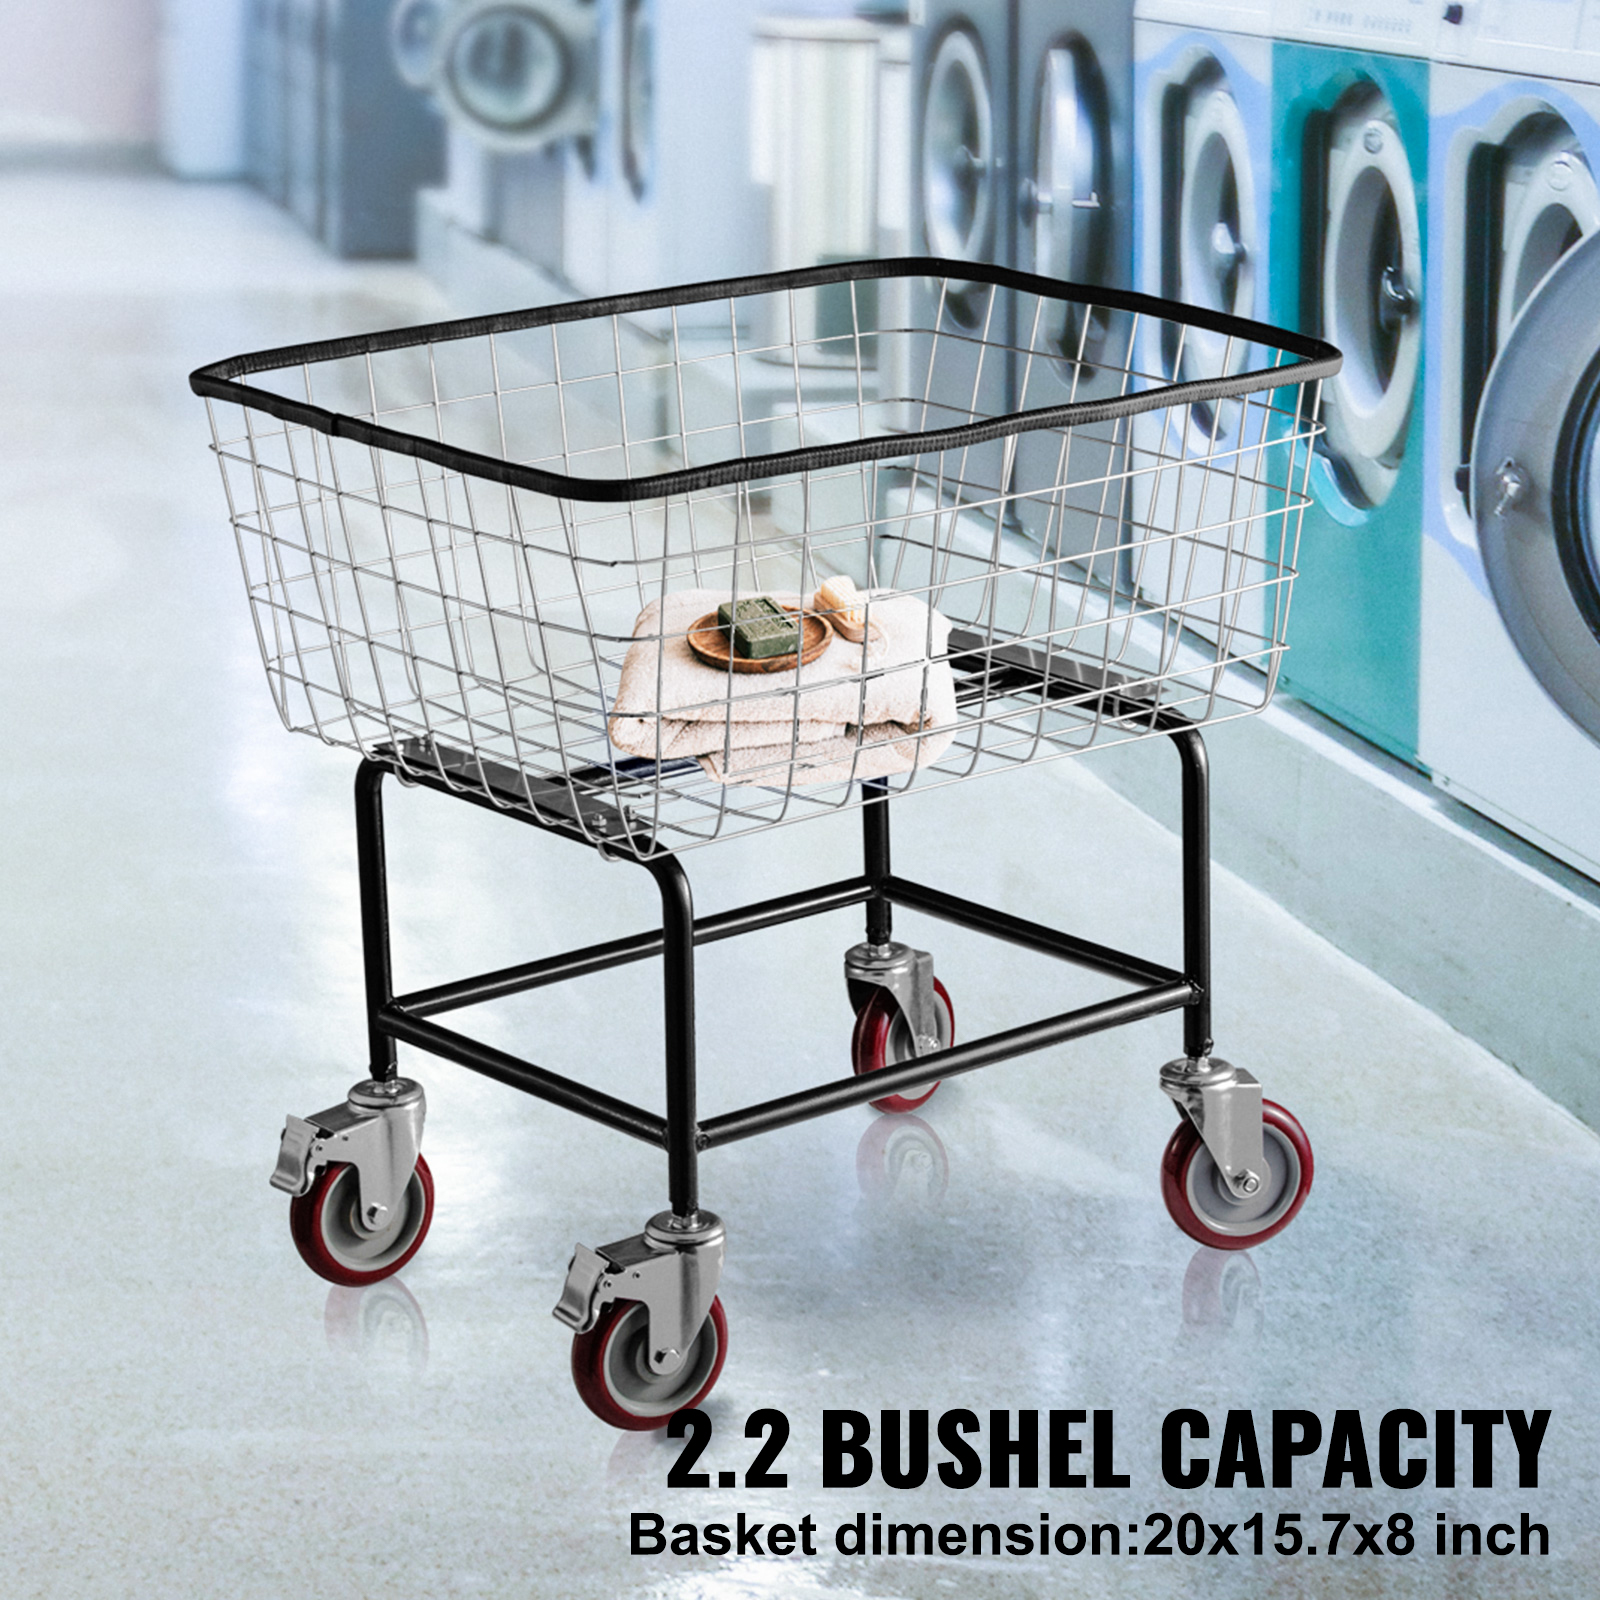 VEVORbrand Steel Rolling Laundry Cart 2.2 Bushel, Wire Laundry Basket with Wheels, Steel Frame with Galvanized Finish, 5" Casters, Wire Cart for Laundry - image 3 of 9